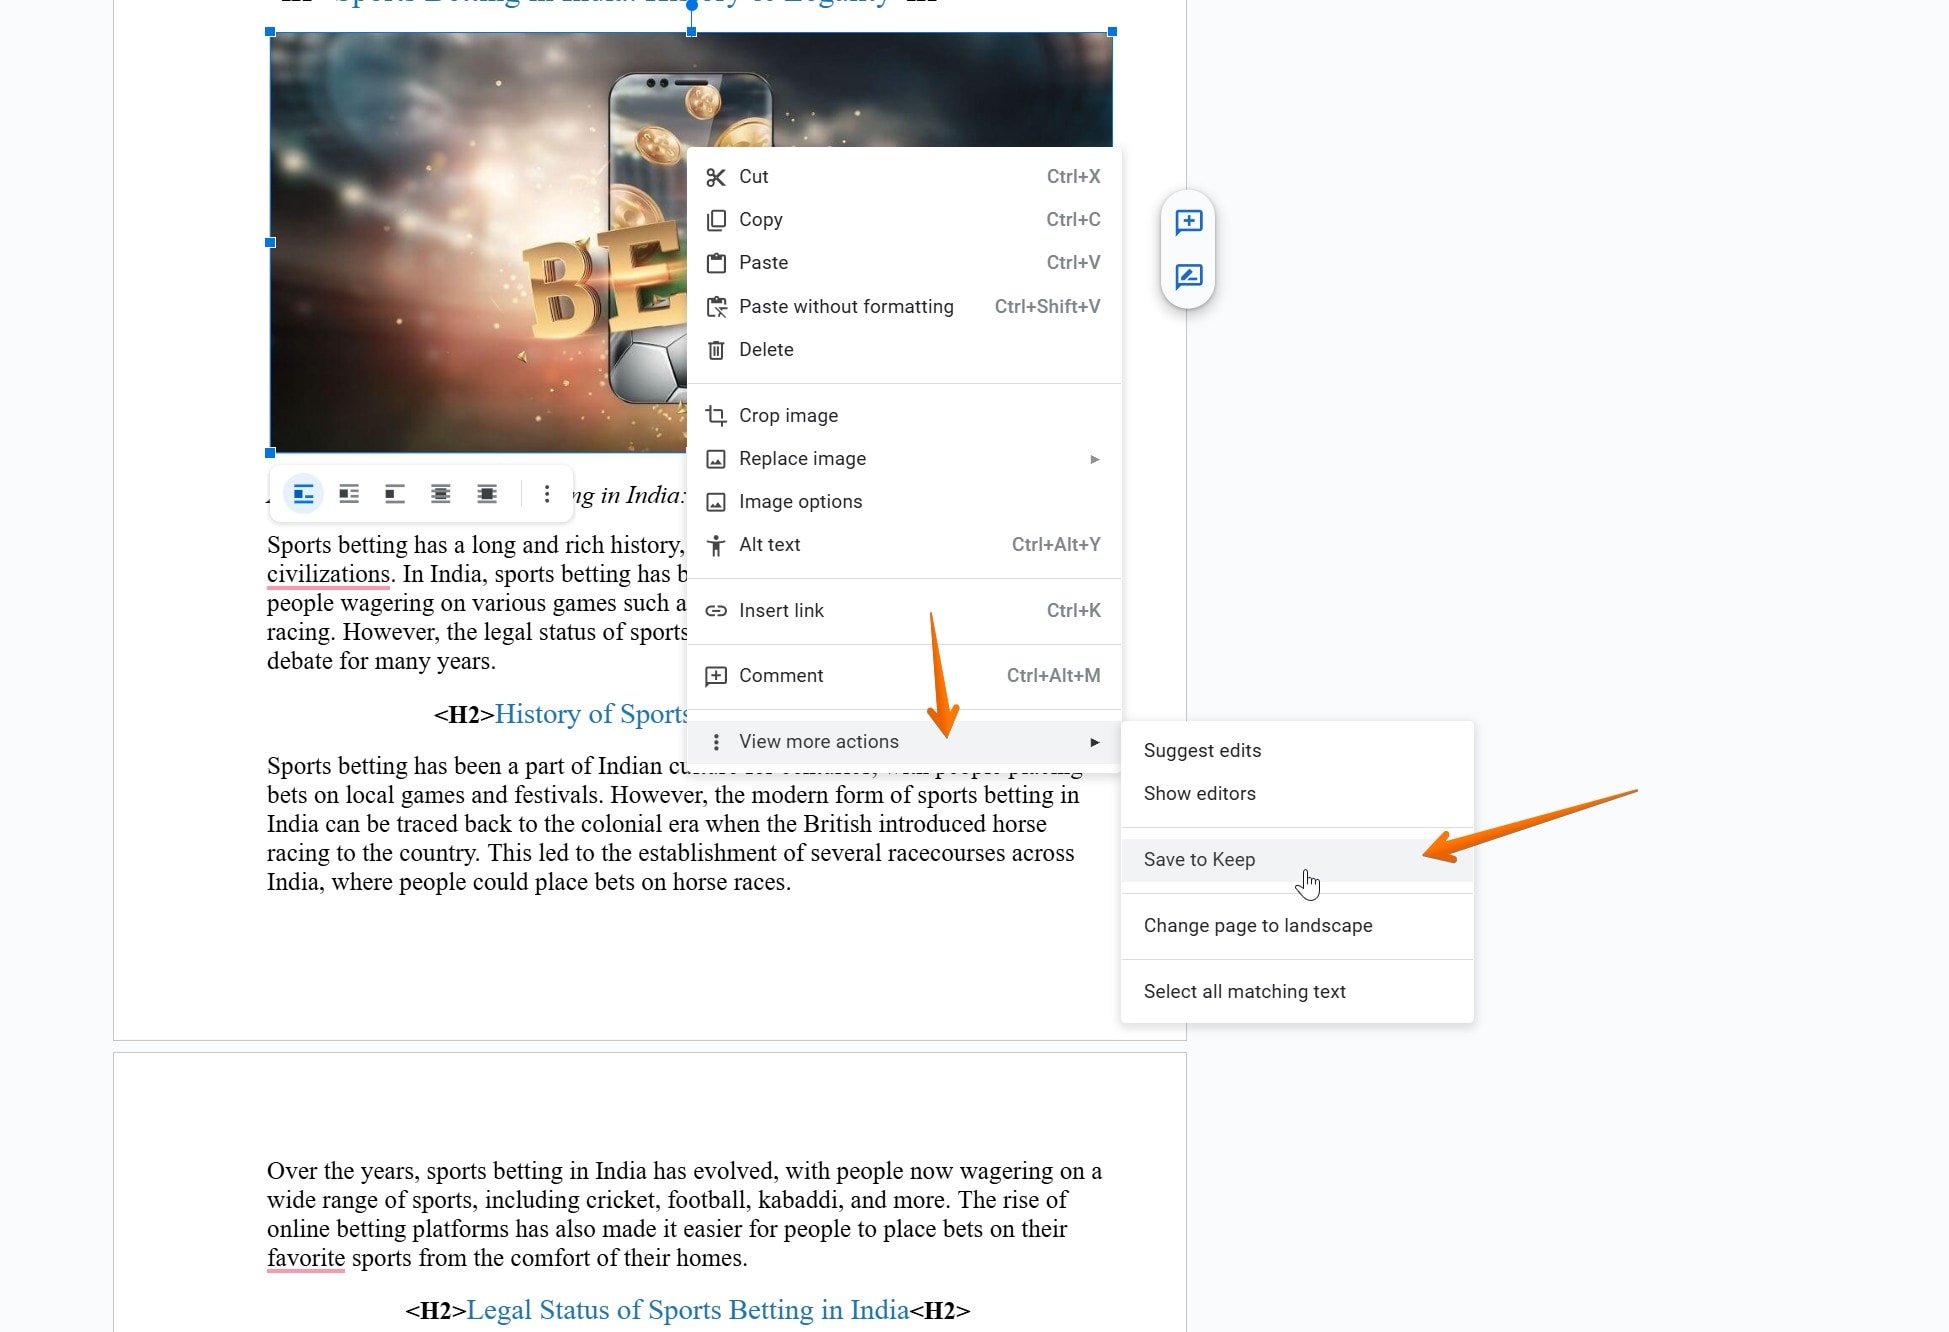 How to Download an Image from a Google Doc (3 Easy Ways) 11